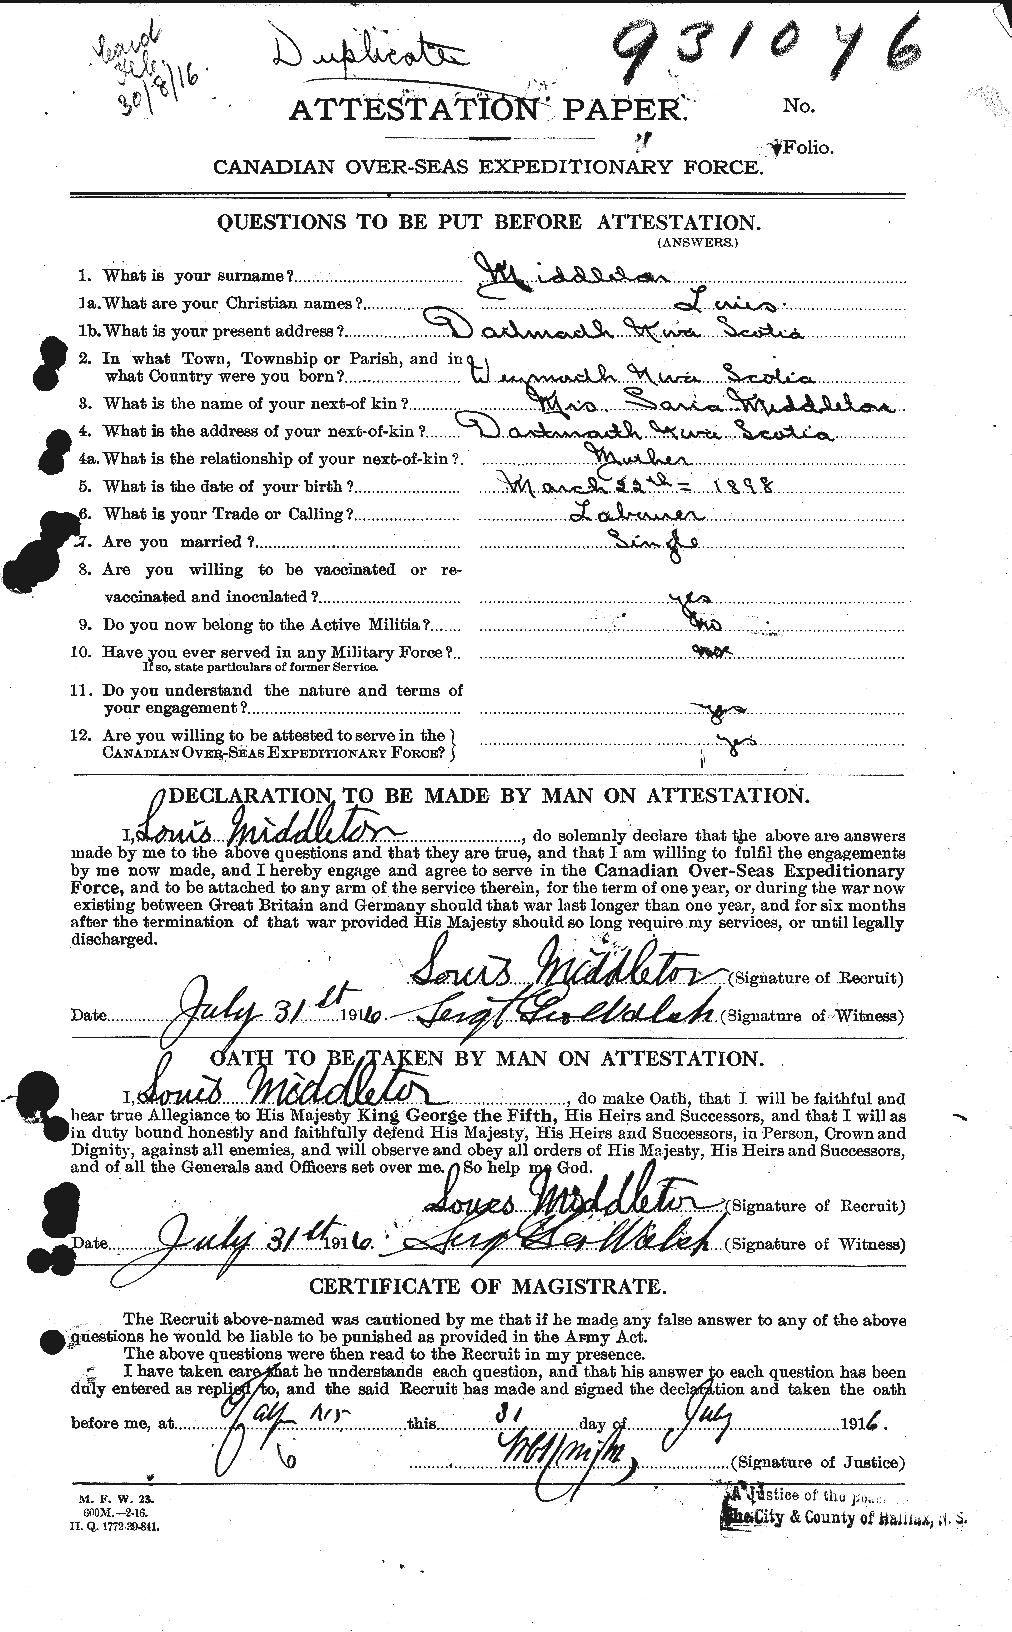 Personnel Records of the First World War - CEF 493146a